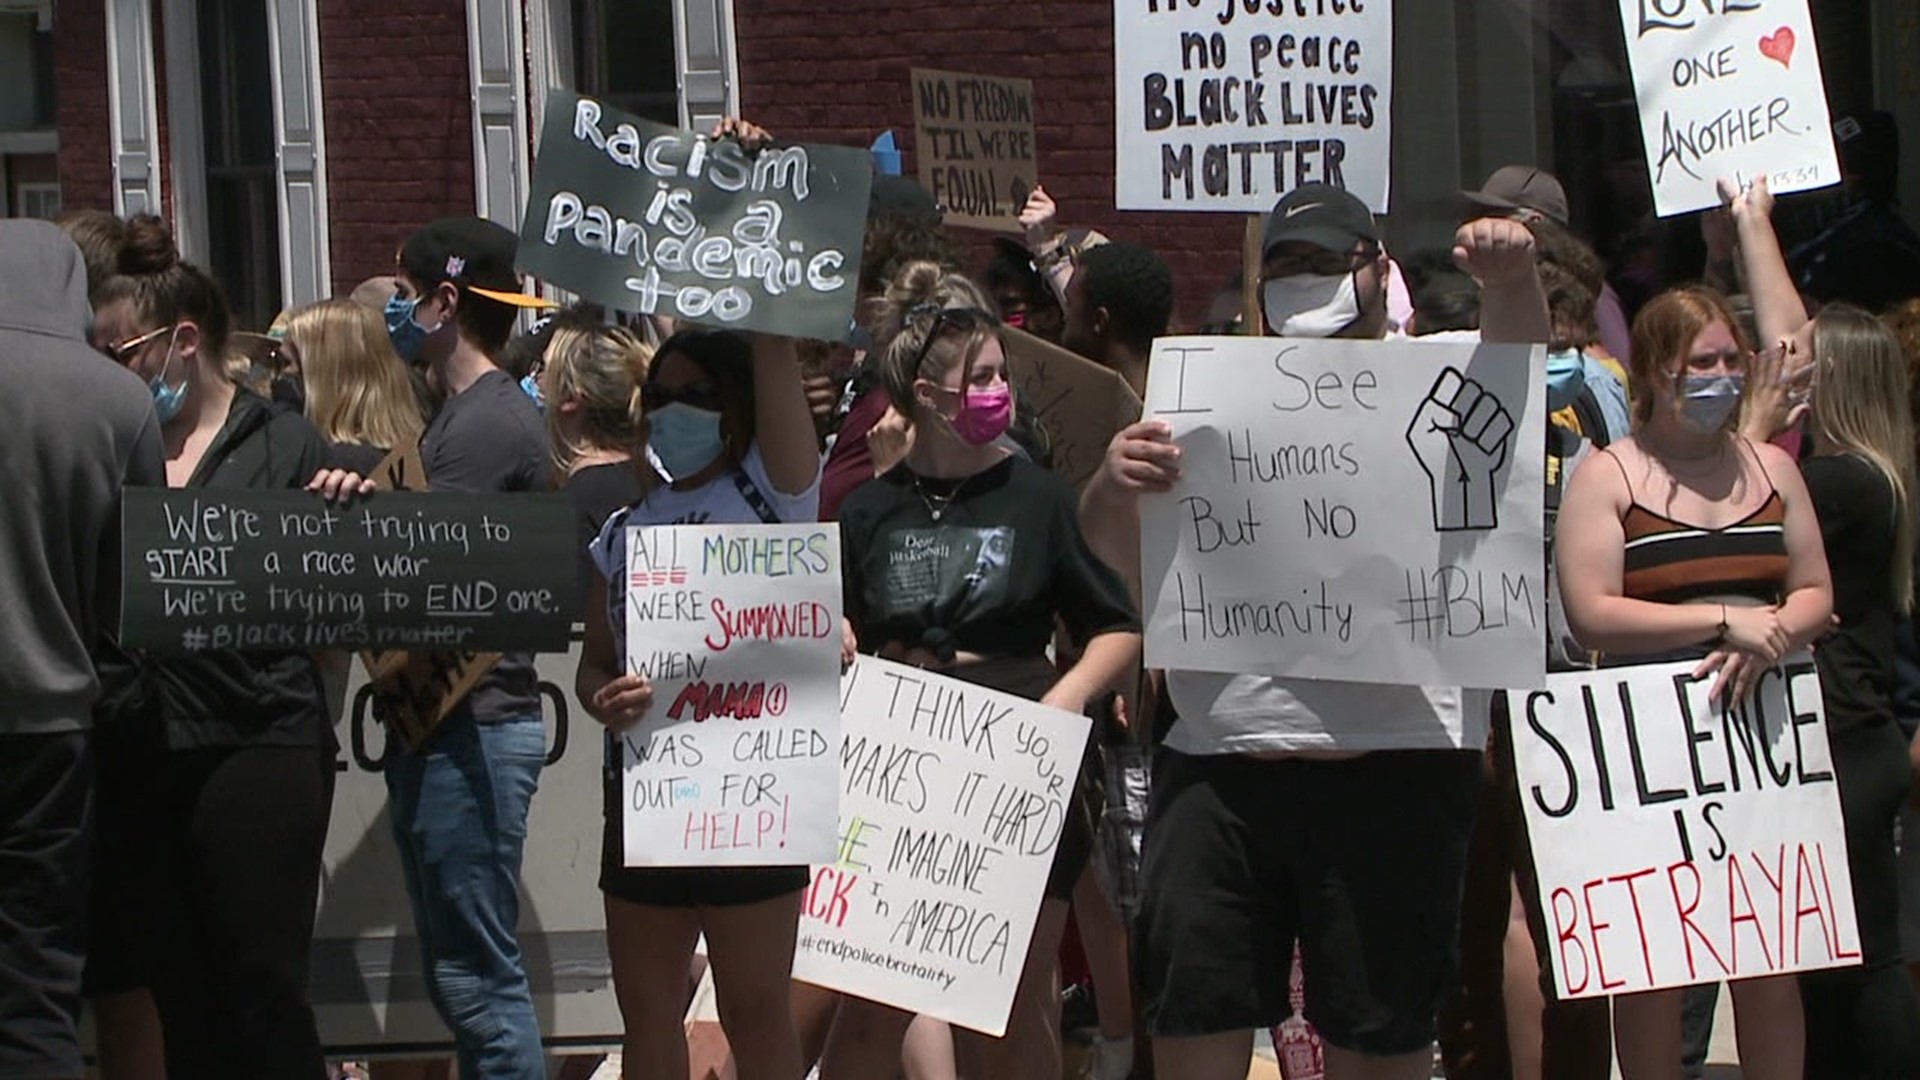 Protests continued in Union County where people voiced injustices about equality and police brutality.